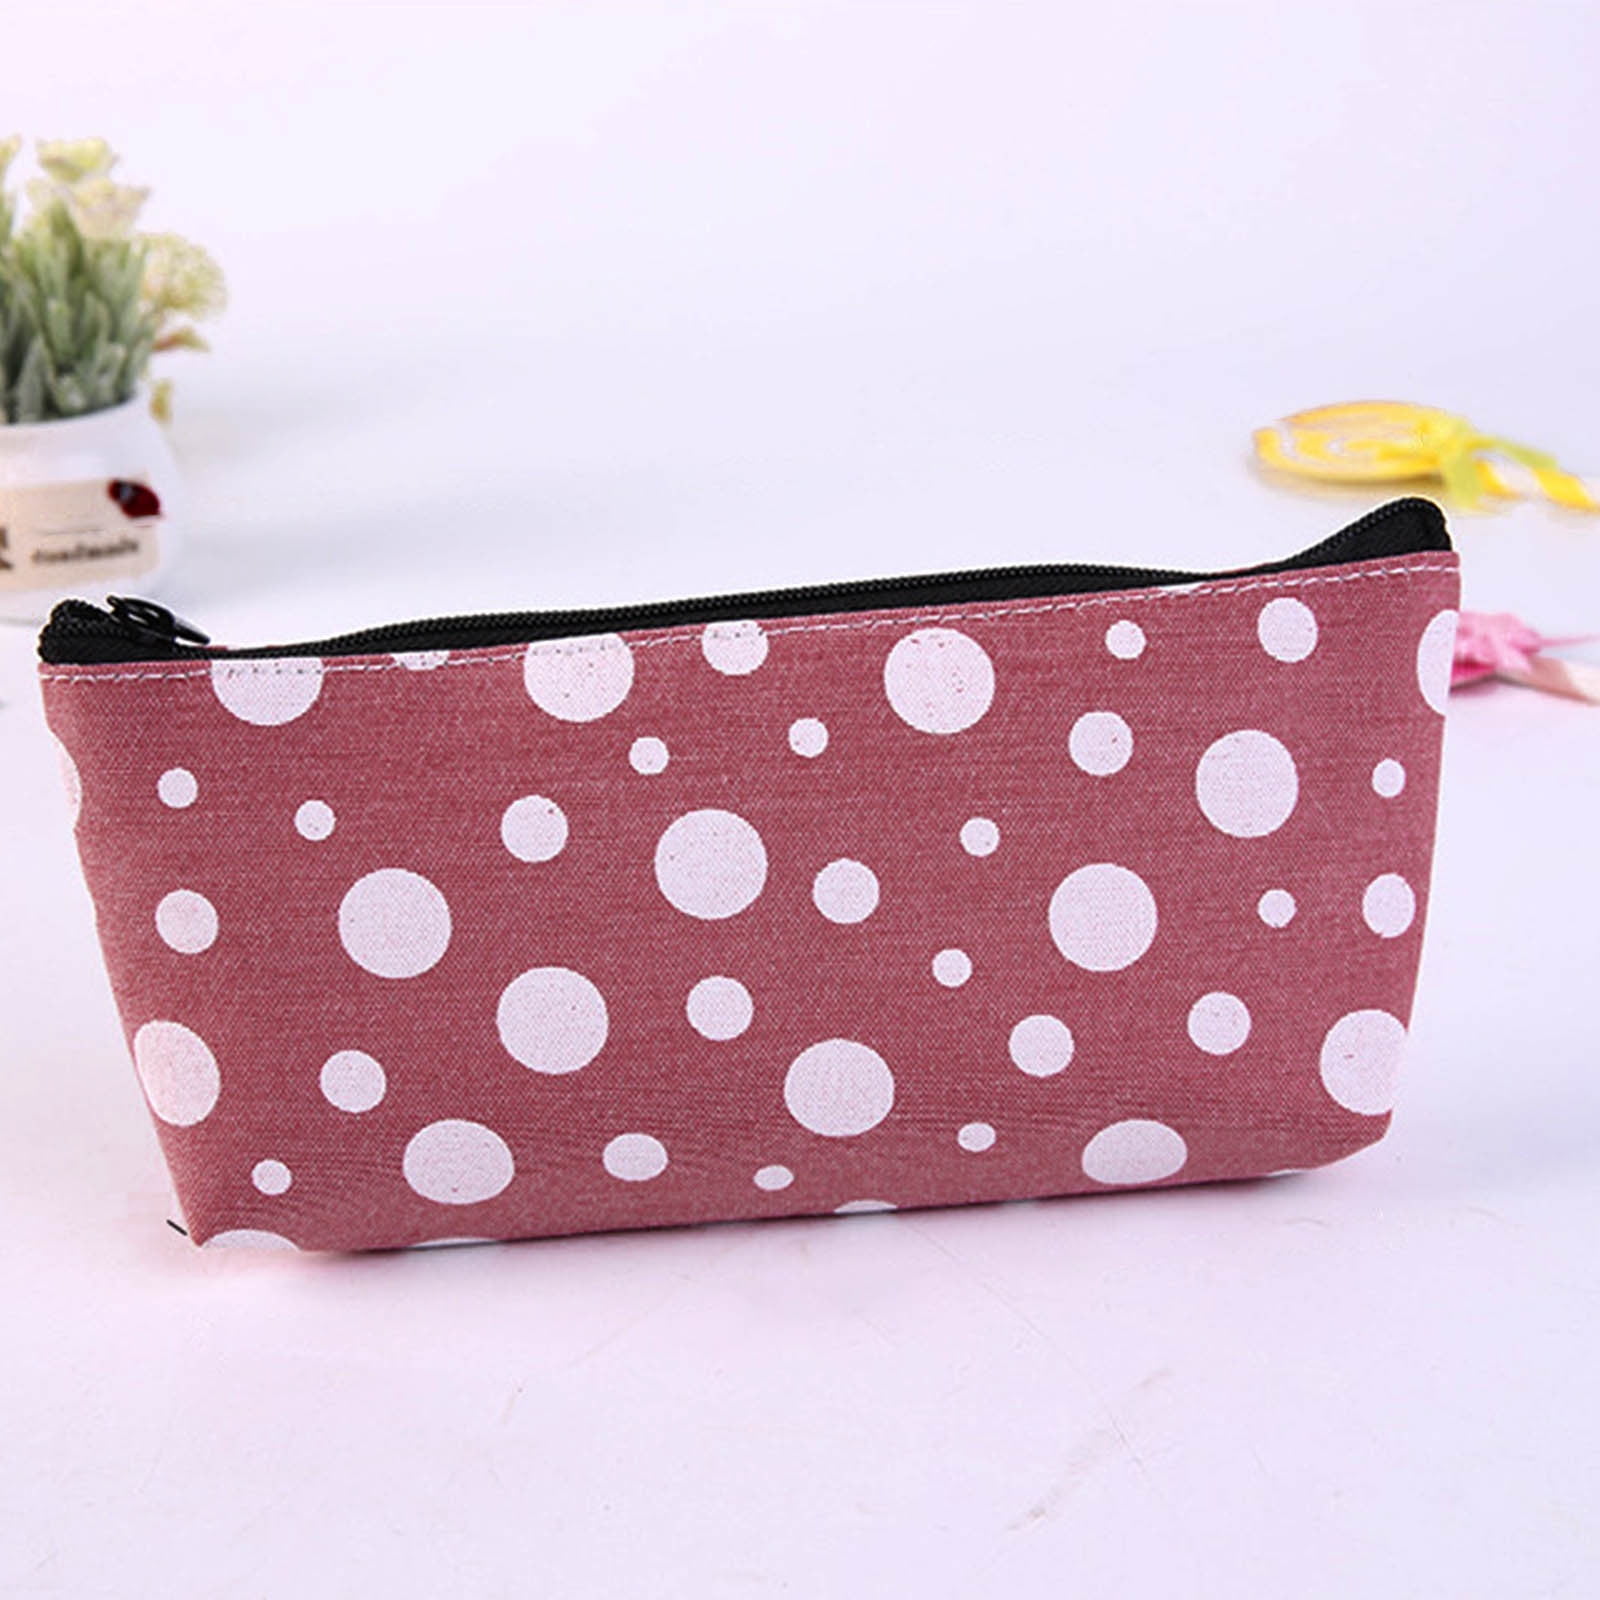 COFEST Long Polka Candy Colored Pencil Case Creative Canvas Pencil Case  Cute Pencil Case Small Slim Pencil Case Slim Polka Dot Pencil Pouches  Orange 